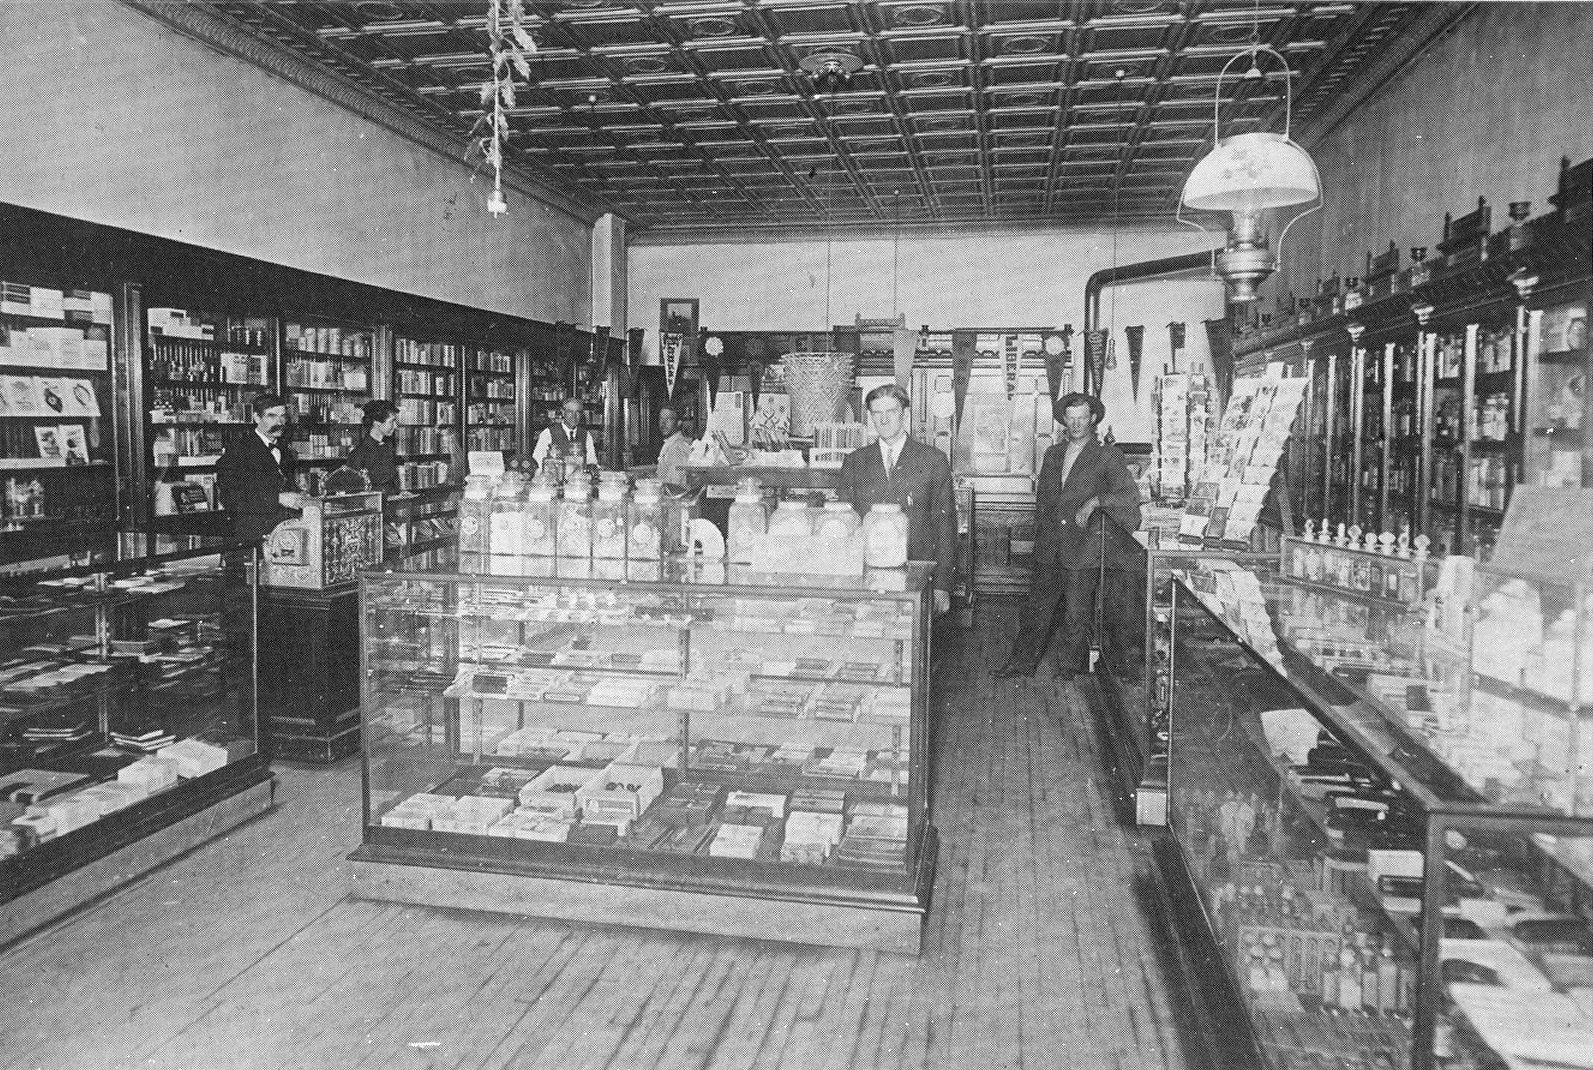 Smith's Drug Store 1913. Left to Right: Tom Smith, Belle Smith, Dr George Smith, customer, Mr Moser (clerk), customer